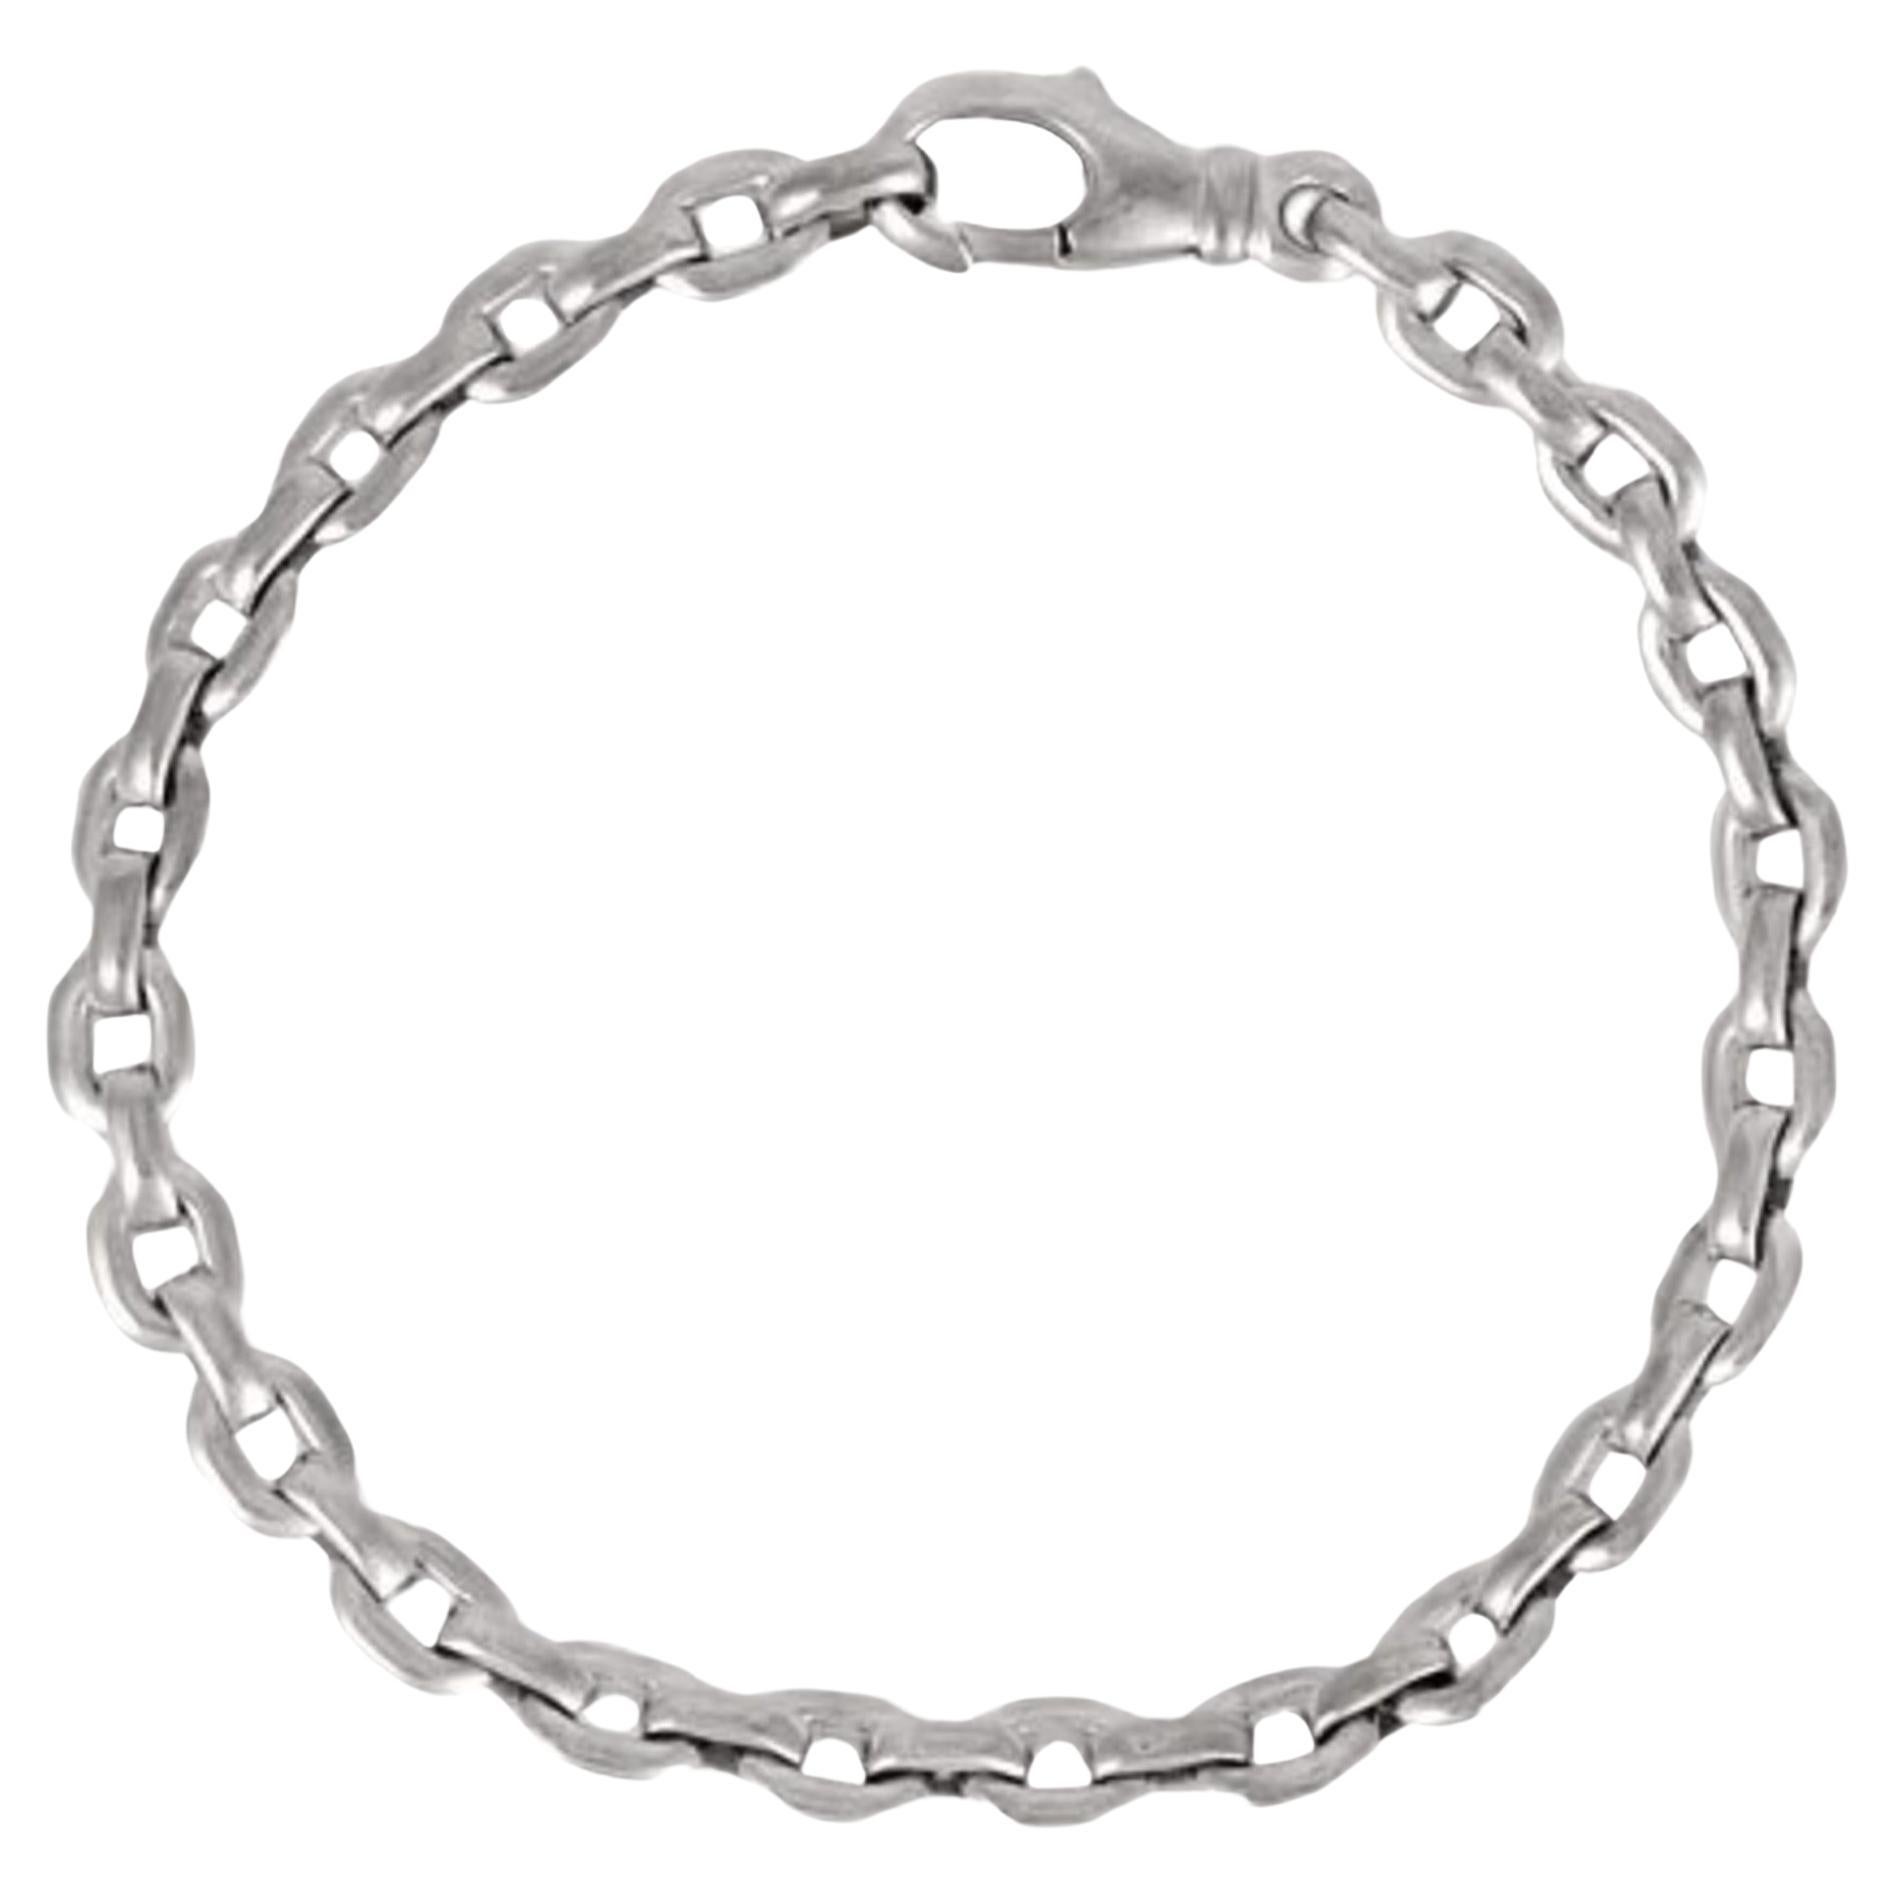 Petite Hinged Nail Bracelet – Corazon Sterling Silver from Taxco